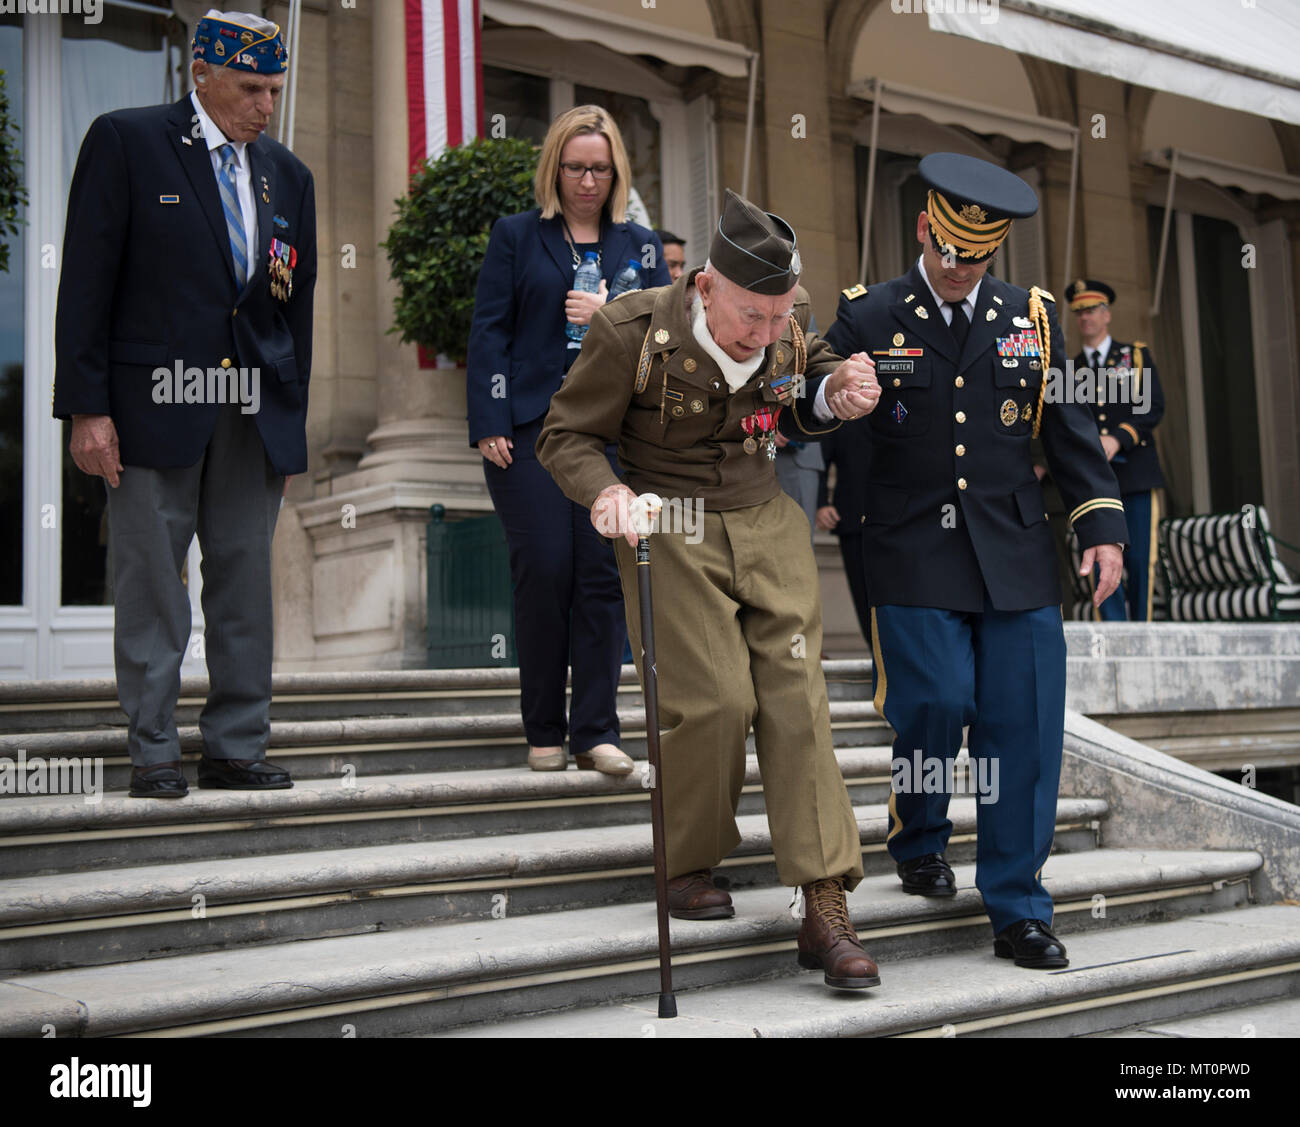 Army Lt. Col. Jessie Brewster, Aide de Camp to Marine Corps Gen. Joseph F. Dunford Jr., chairman of the Joint Chiefs of escorts a World War 2 veteran to his seat,